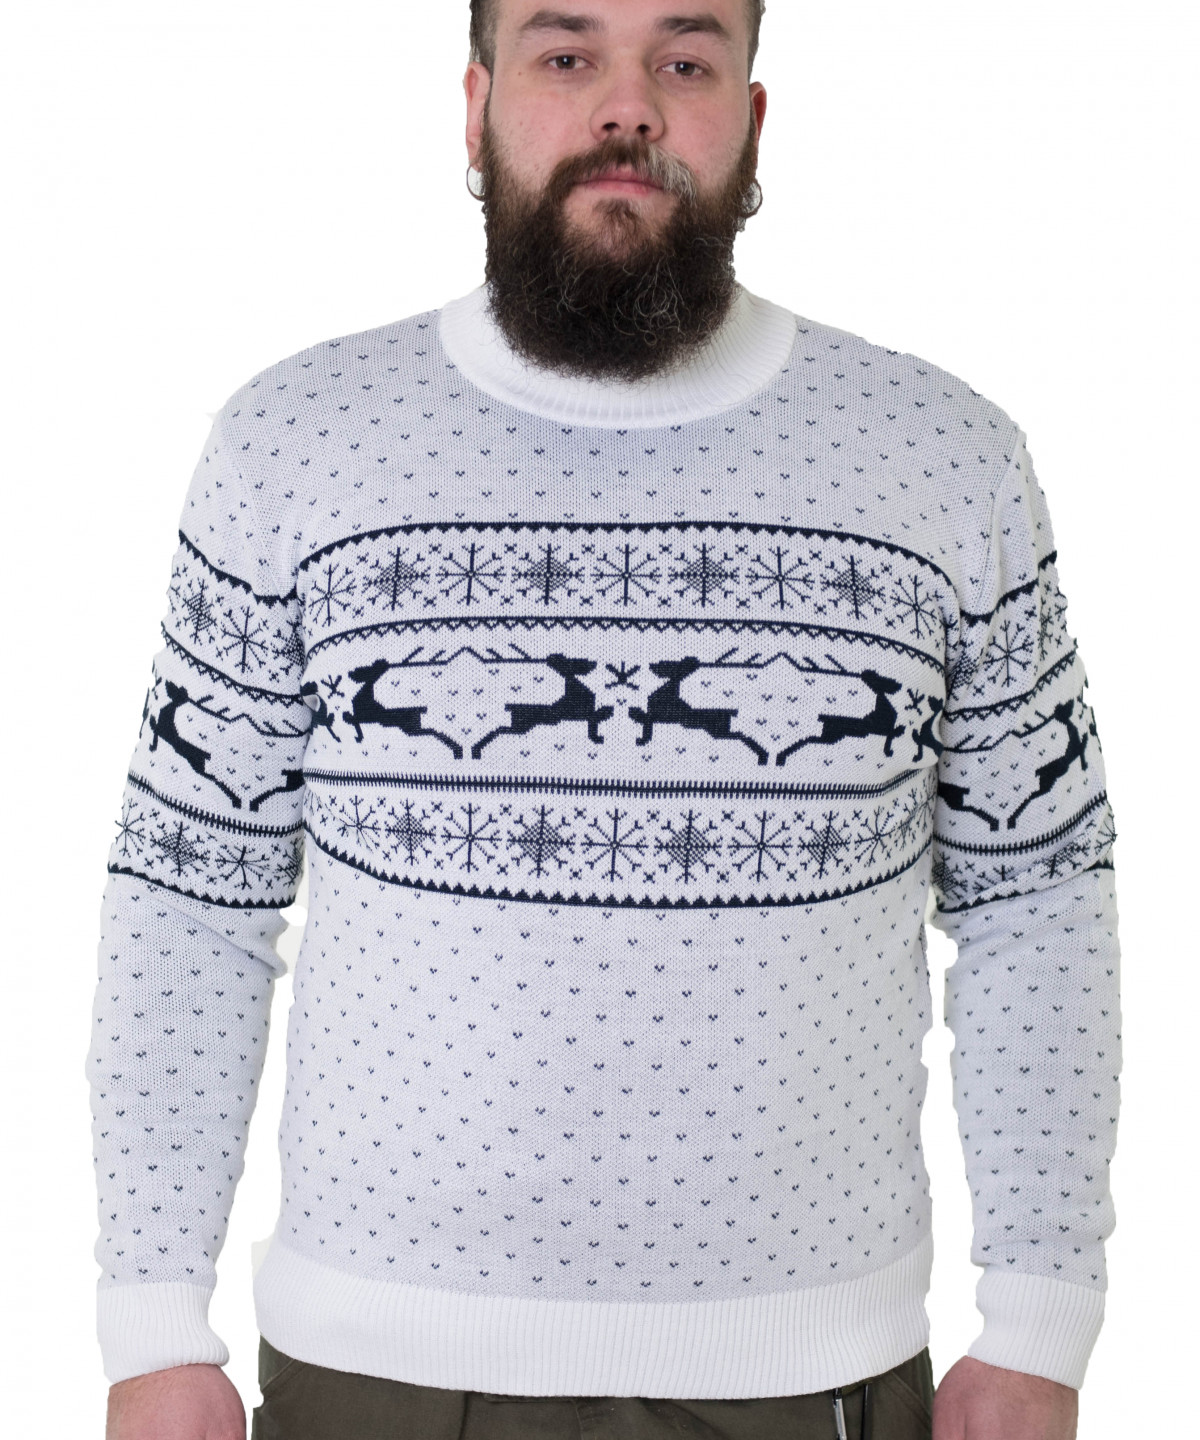 Sweater white with blue ornament "Deers"